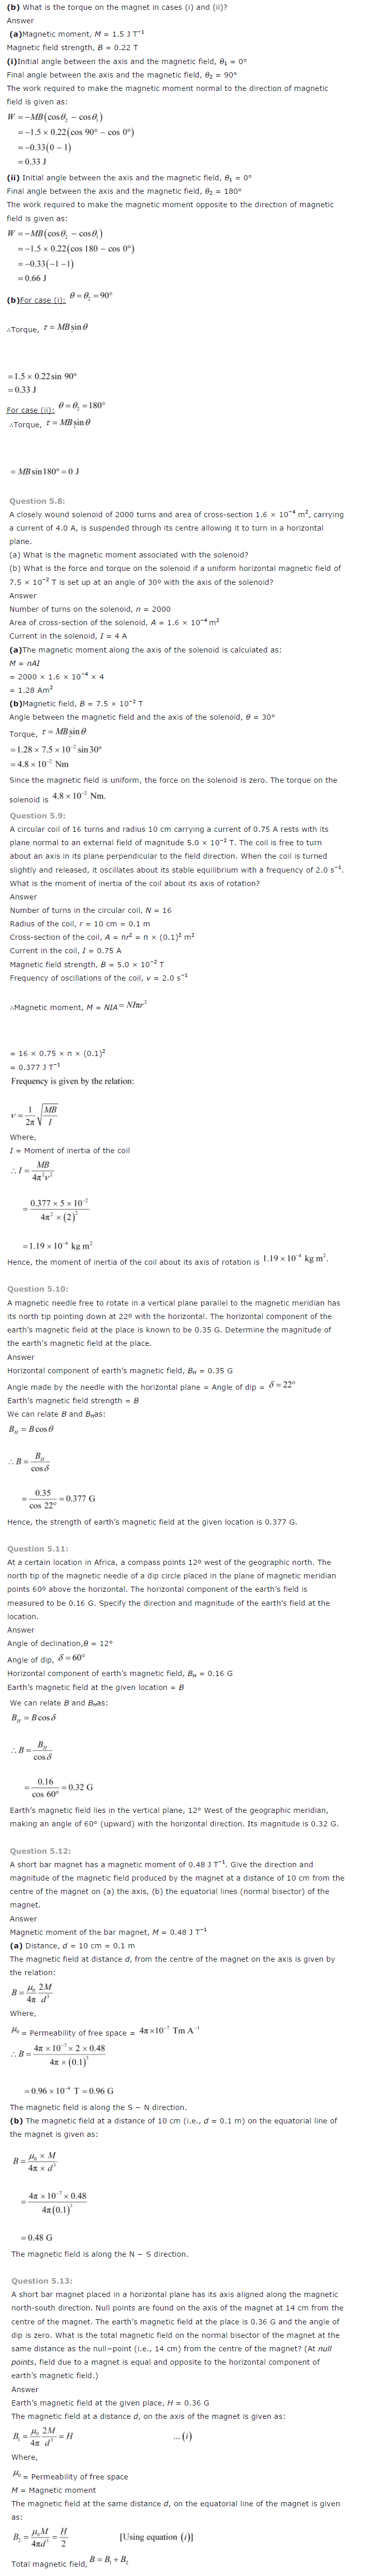 NCERT Solutions for Class 12th Physics